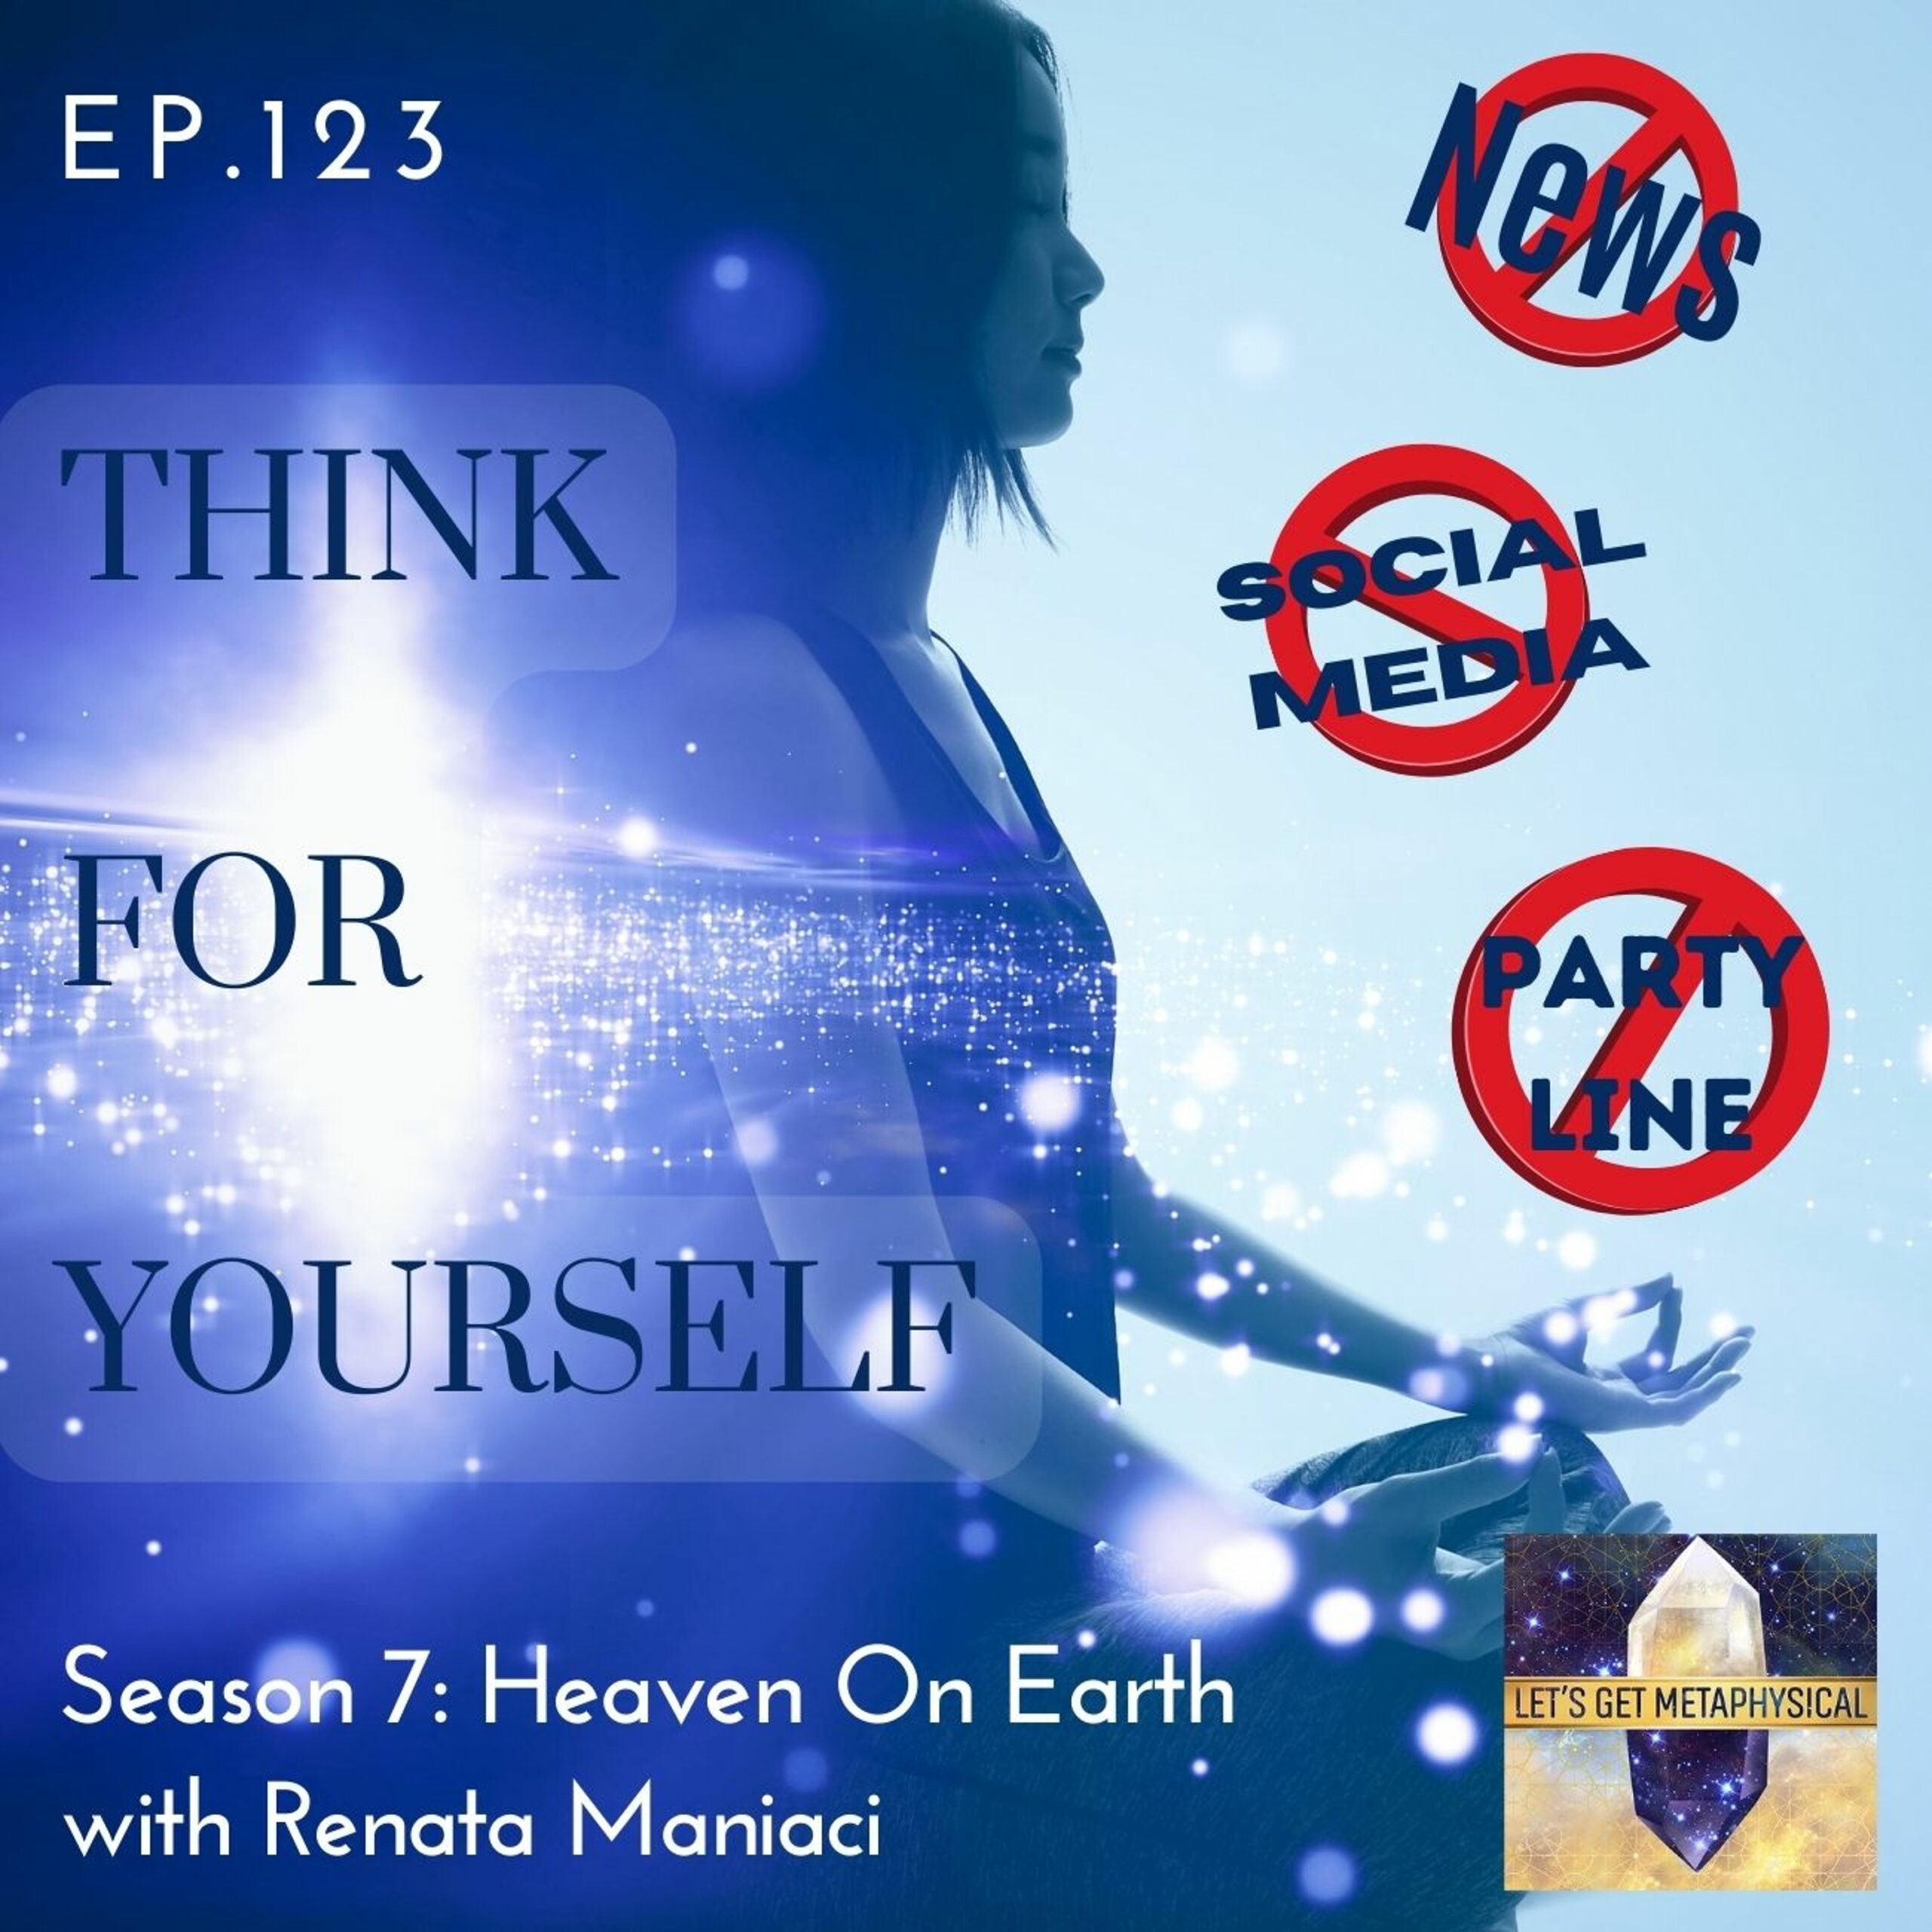 Episode 123: Think For Yourself